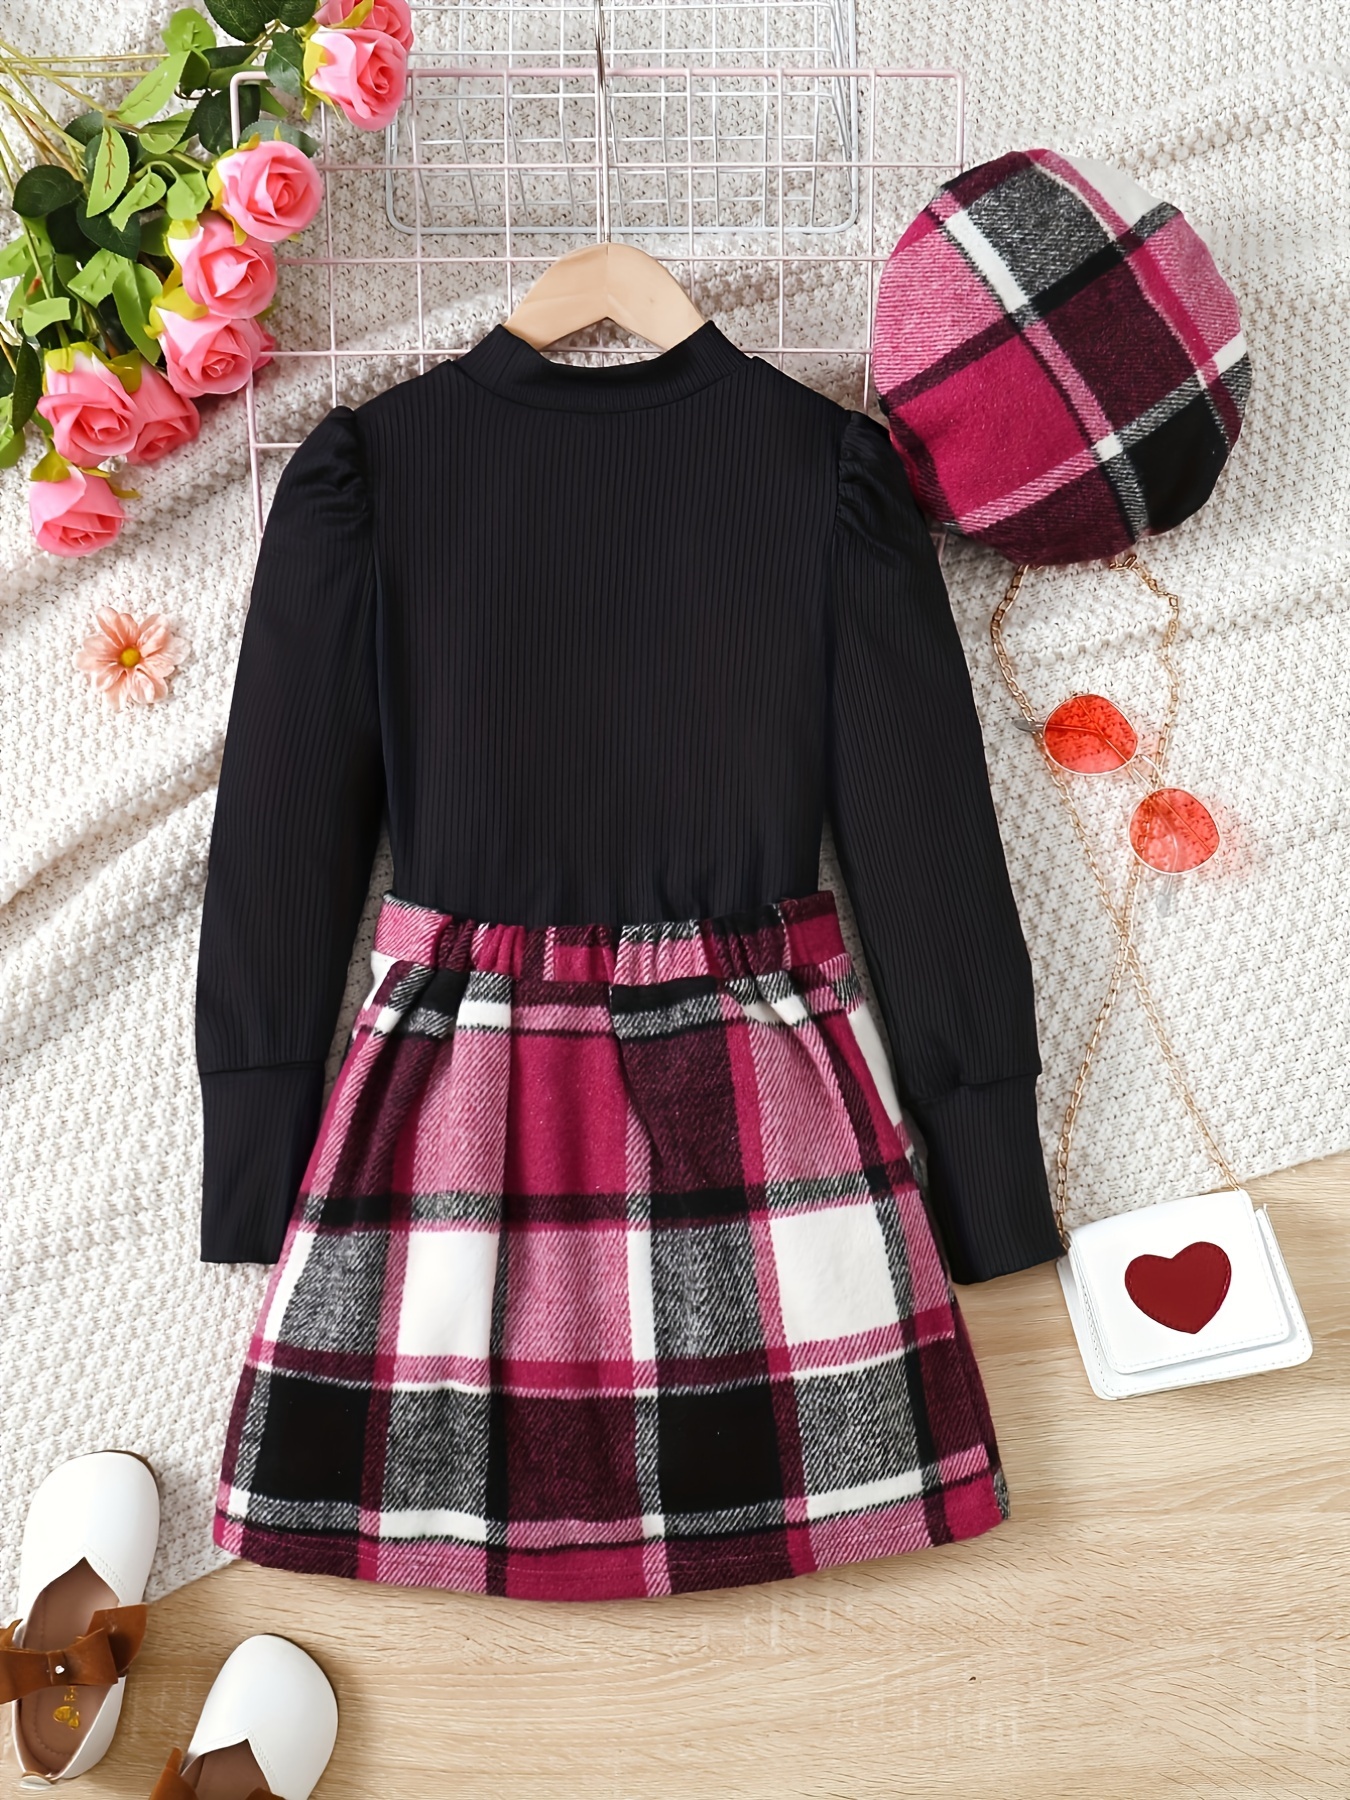 9Y Girl Skirt Sets Casual Winter Fall Dresses Cute Clothes Outfit